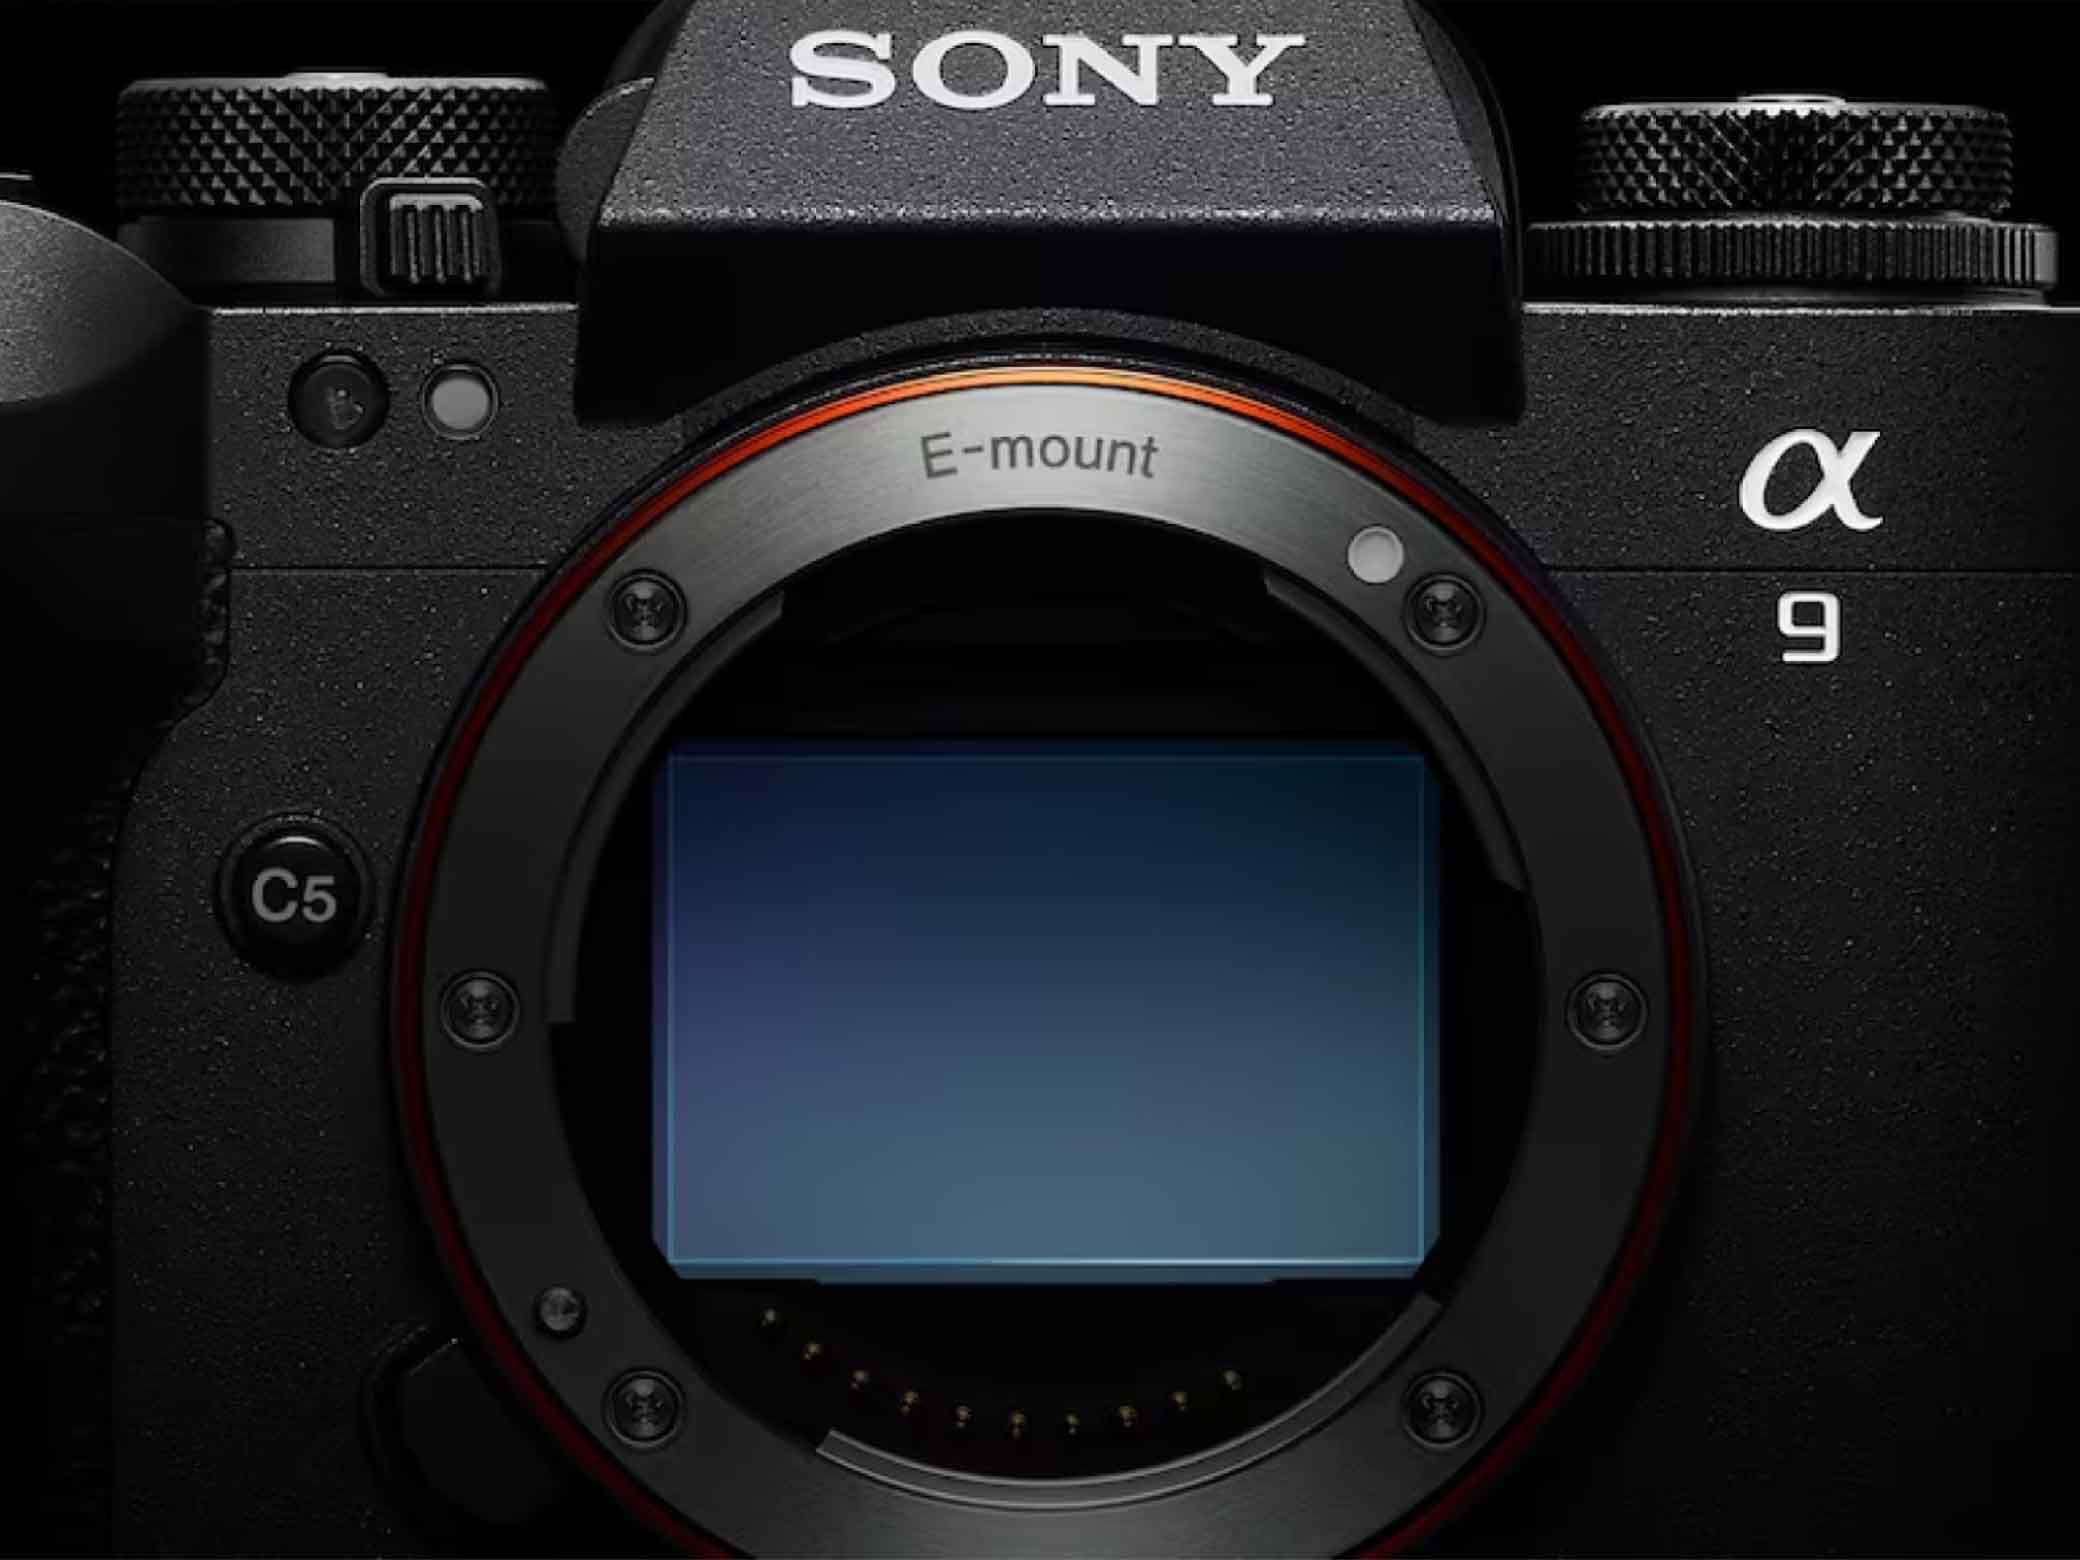 Flash Sync Up to 1/80,000 Sec Underwater with New Sony a9 III Camera!!!